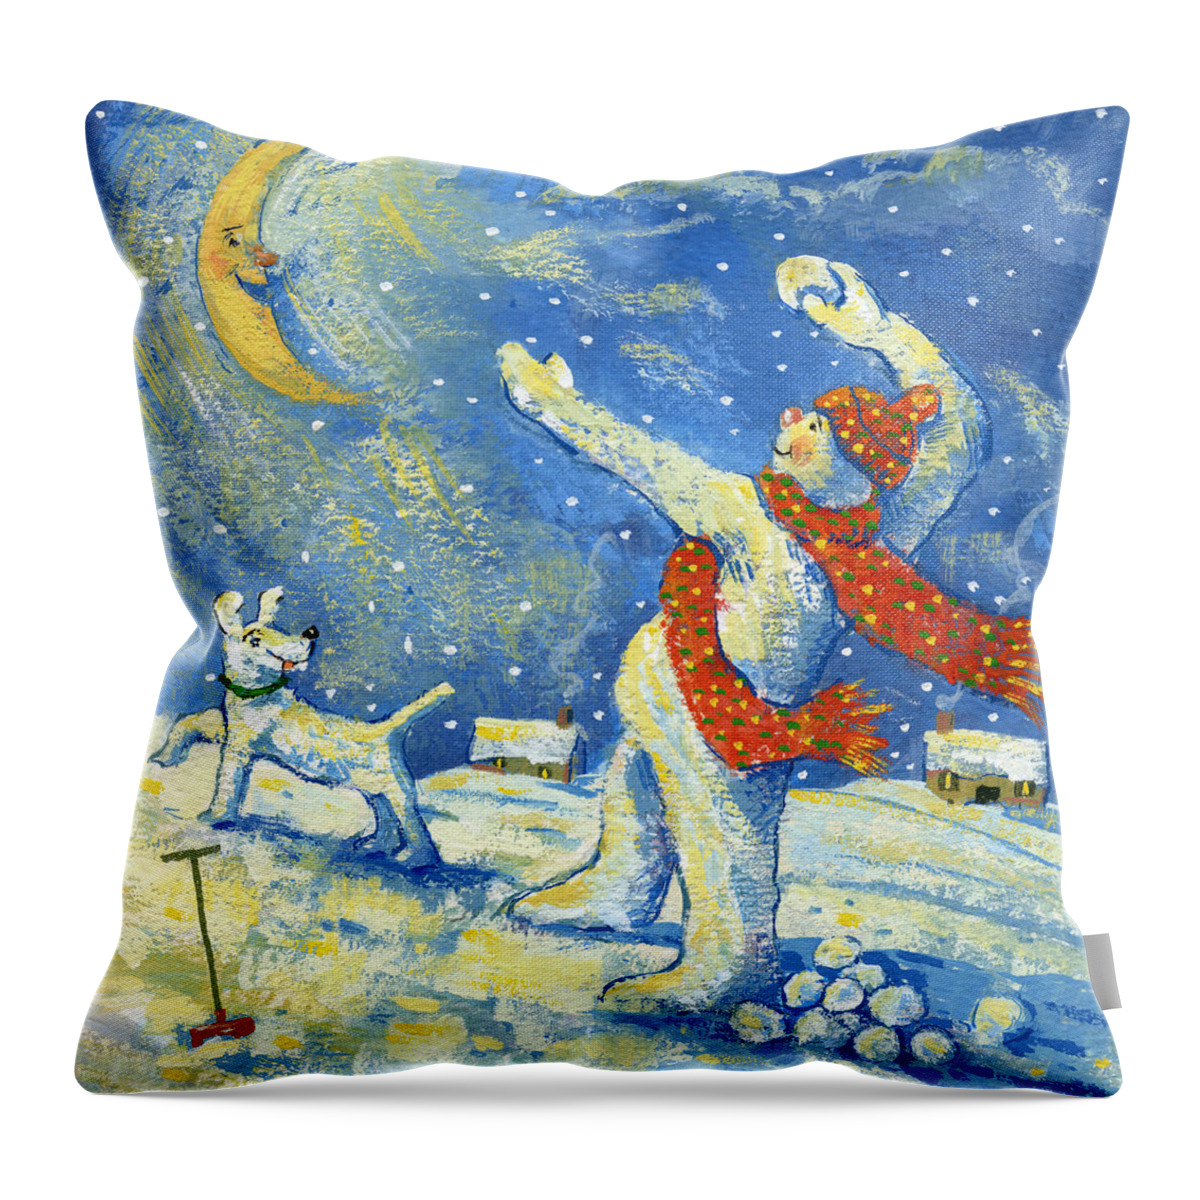 Snowman; Moon; Snow; Dog; Pet; Snowballs; Snowball Fight; Spade; Scarf; House; Entertainment; Christmas; Snowing Throw Pillow featuring the painting Midnight fun and games by David Cooke